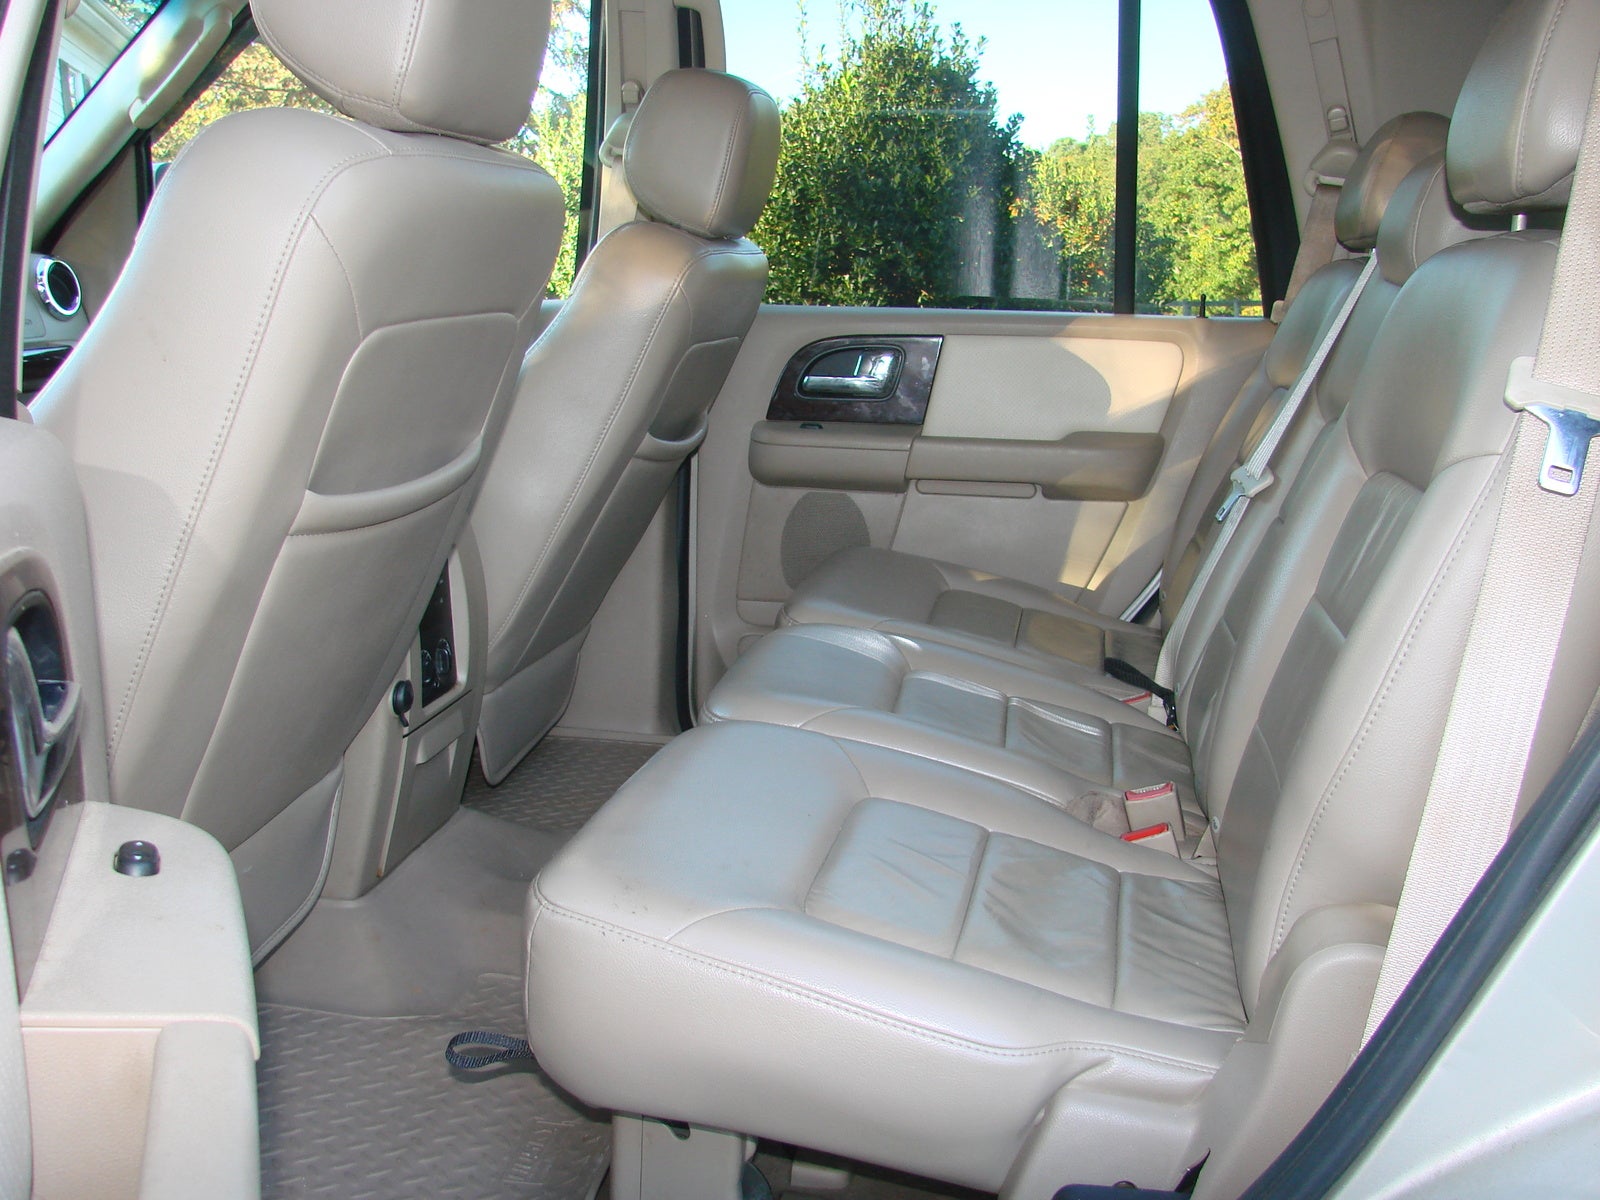 2005 Ford expedition interior dimensions #4